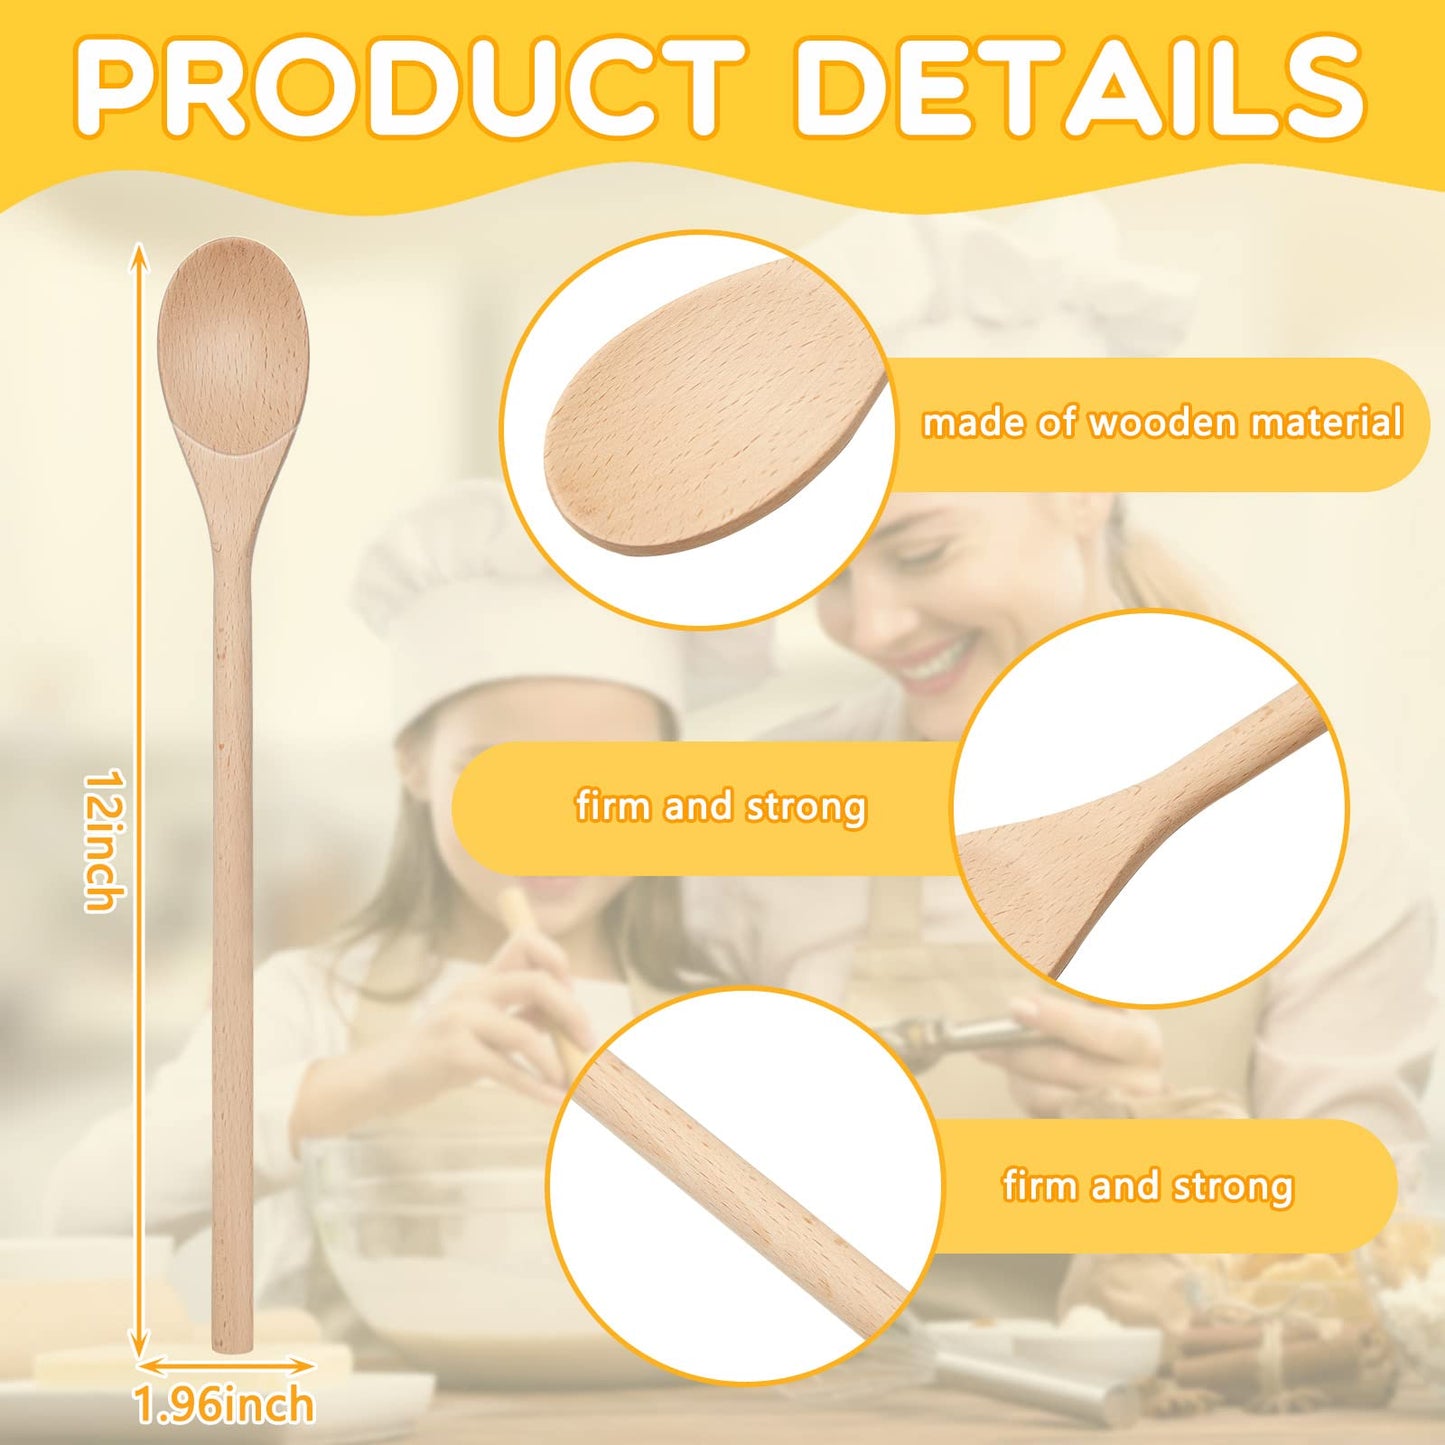 40 Pieces 12 Inch Wooden Kitchen Spoons Long Handle Wooden Cooking Mixing Oval Spoons Wooden Tasting Spoons Mixing Baking Serving Utensils Puppets